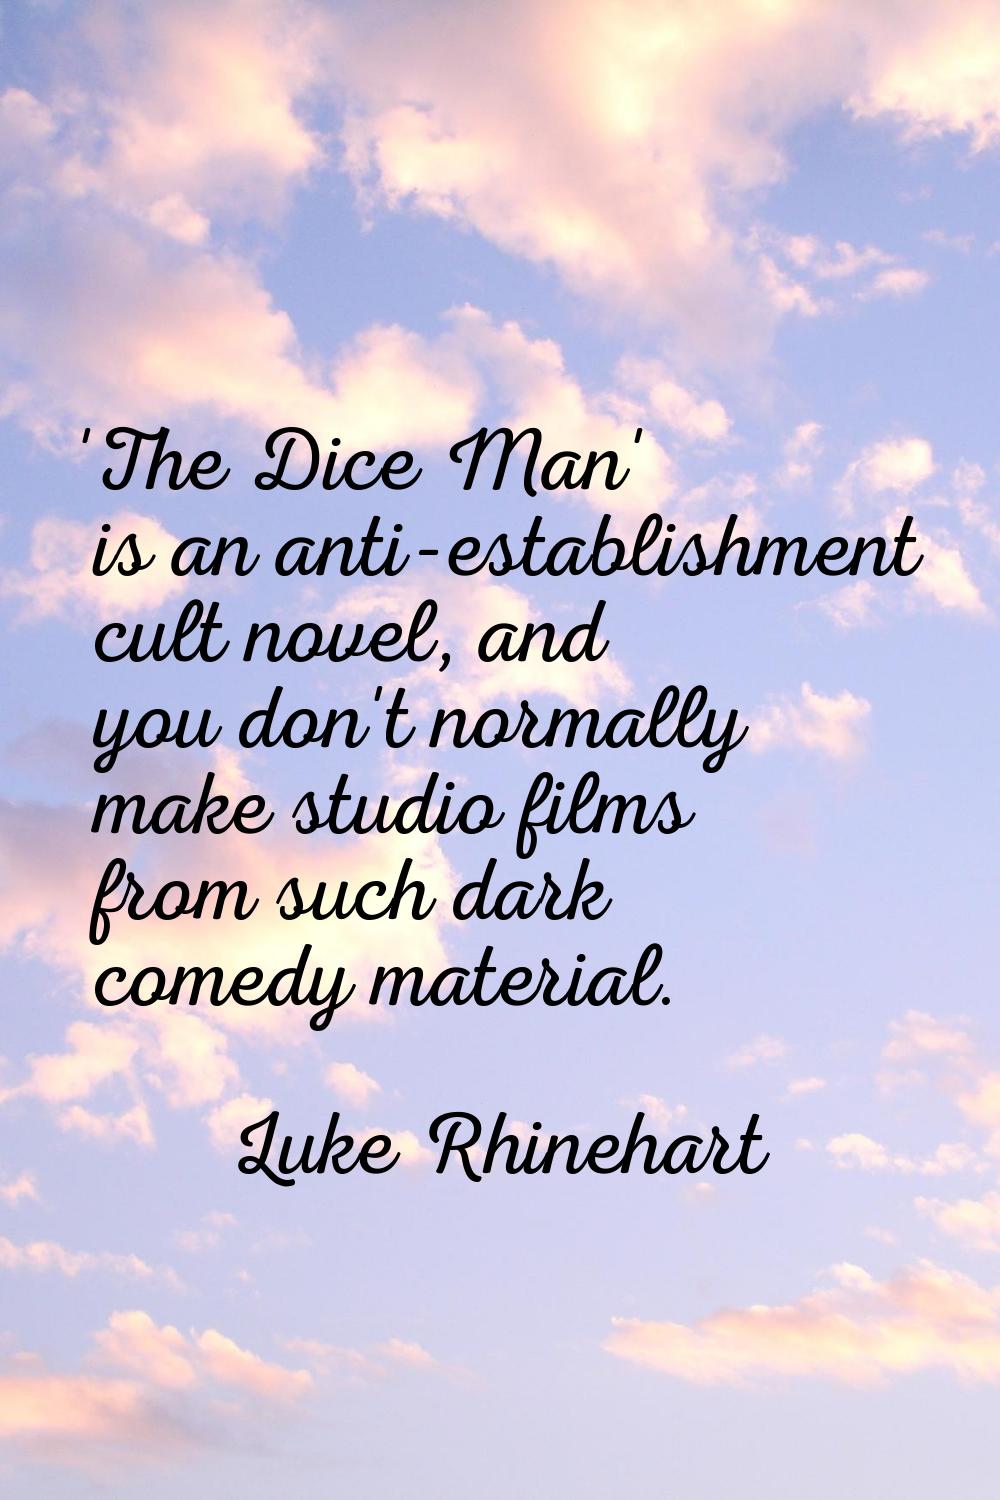 'The Dice Man' is an anti-establishment cult novel, and you don't normally make studio films from s